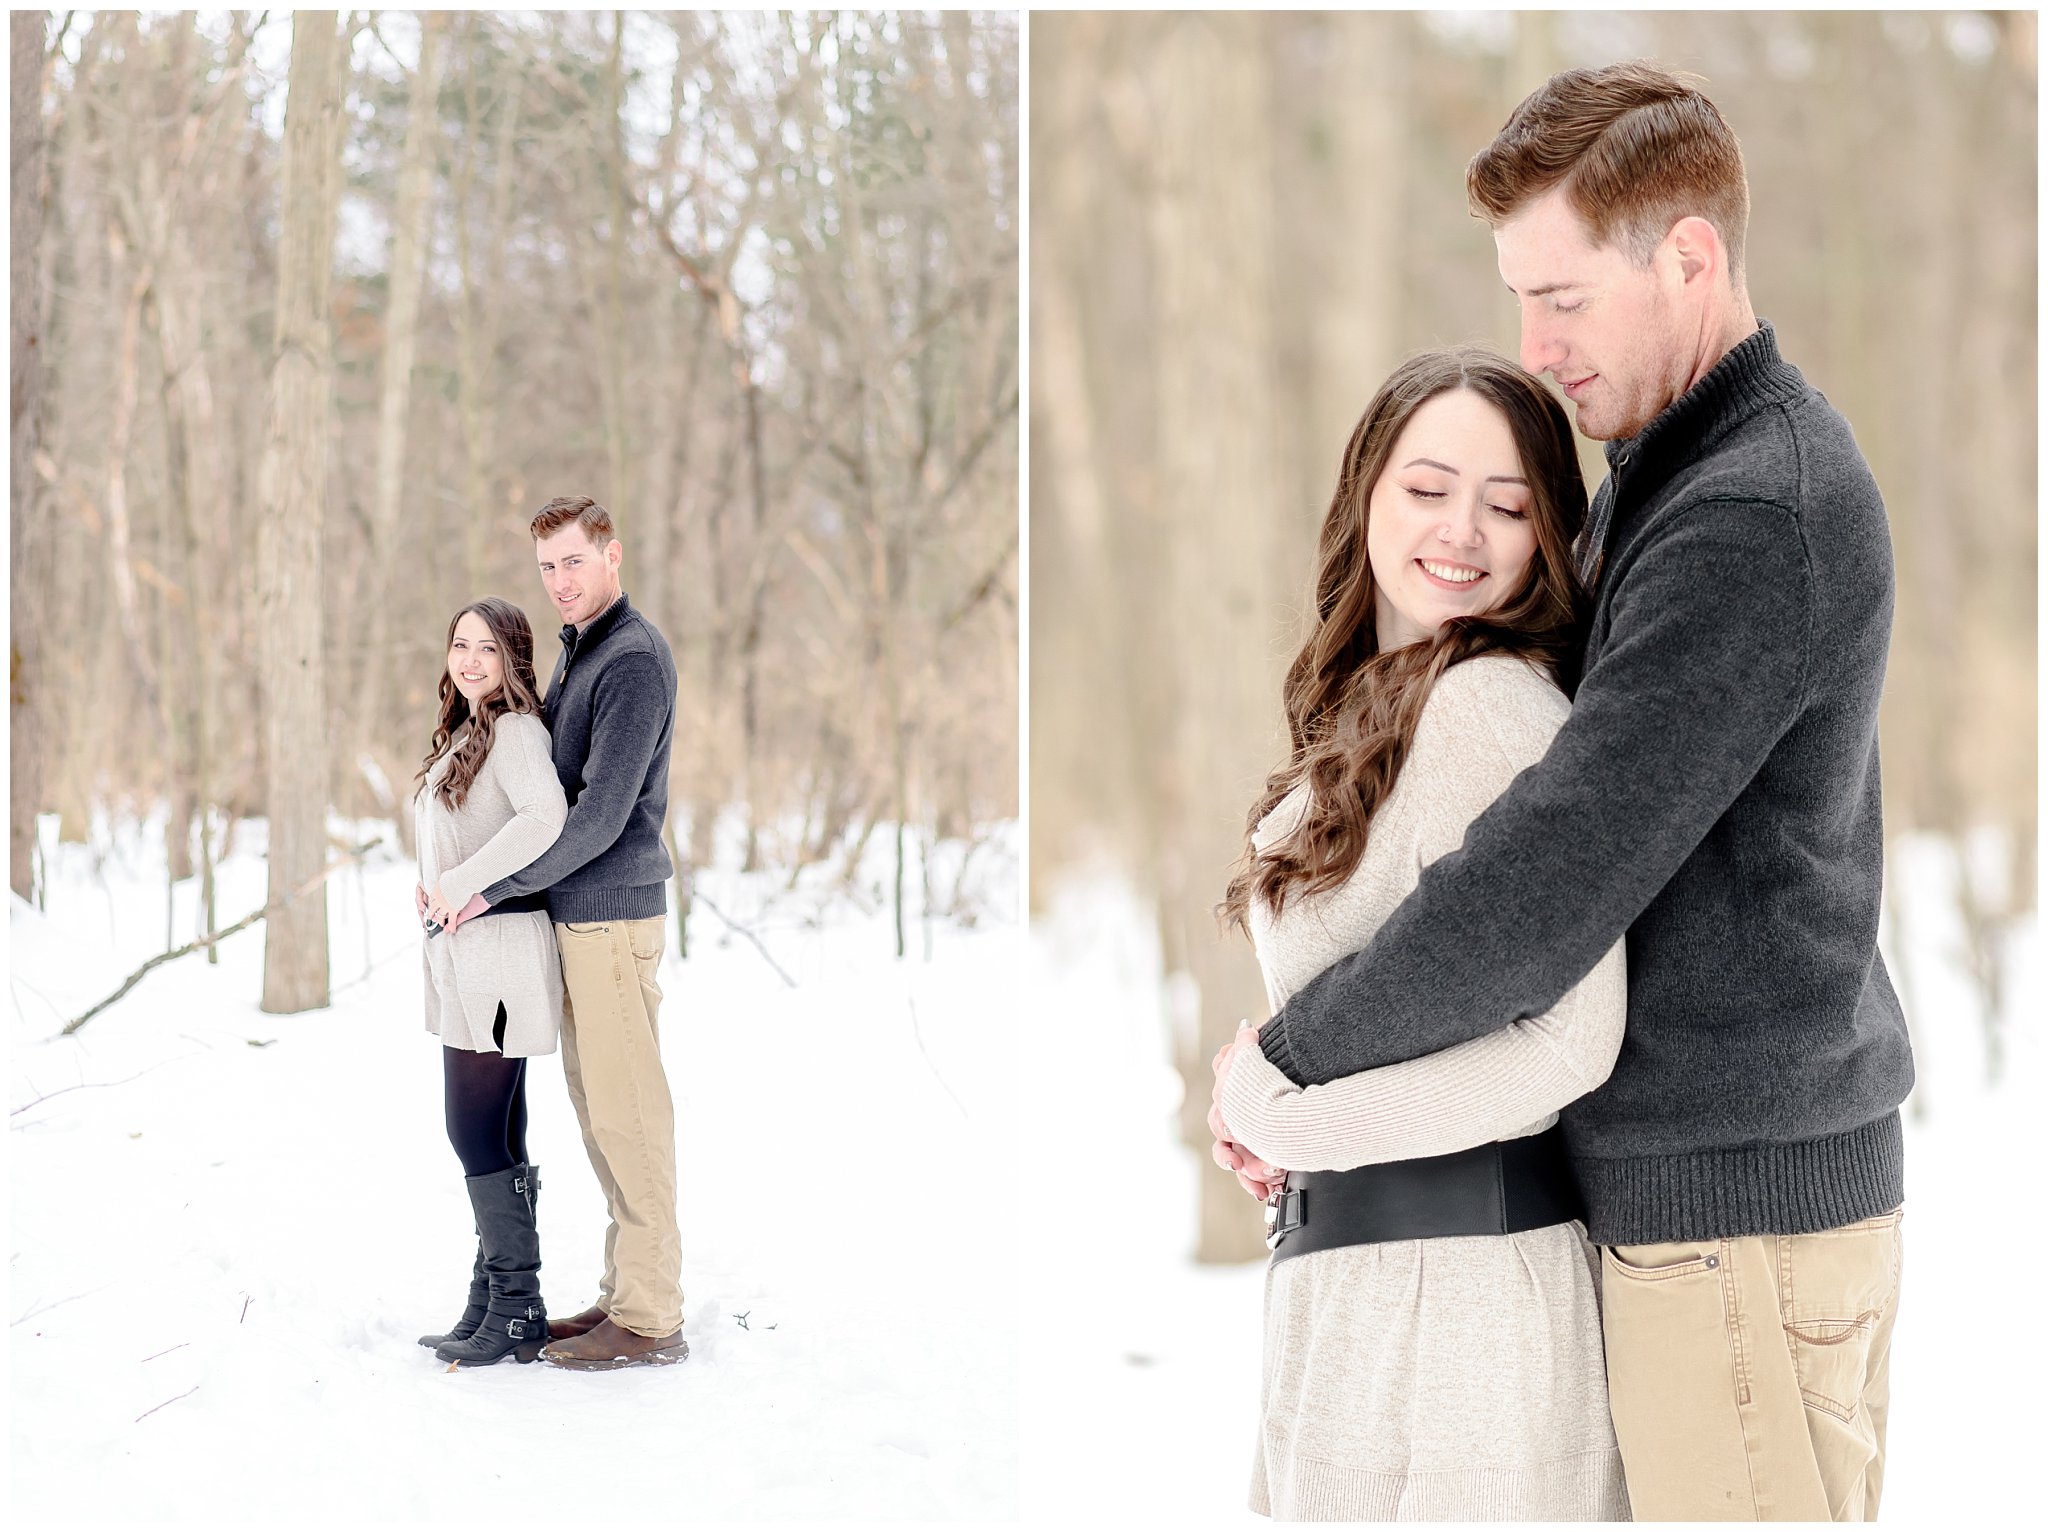 Engagement Session,Great Bear. Fulton New York,Joanna Young Photography,